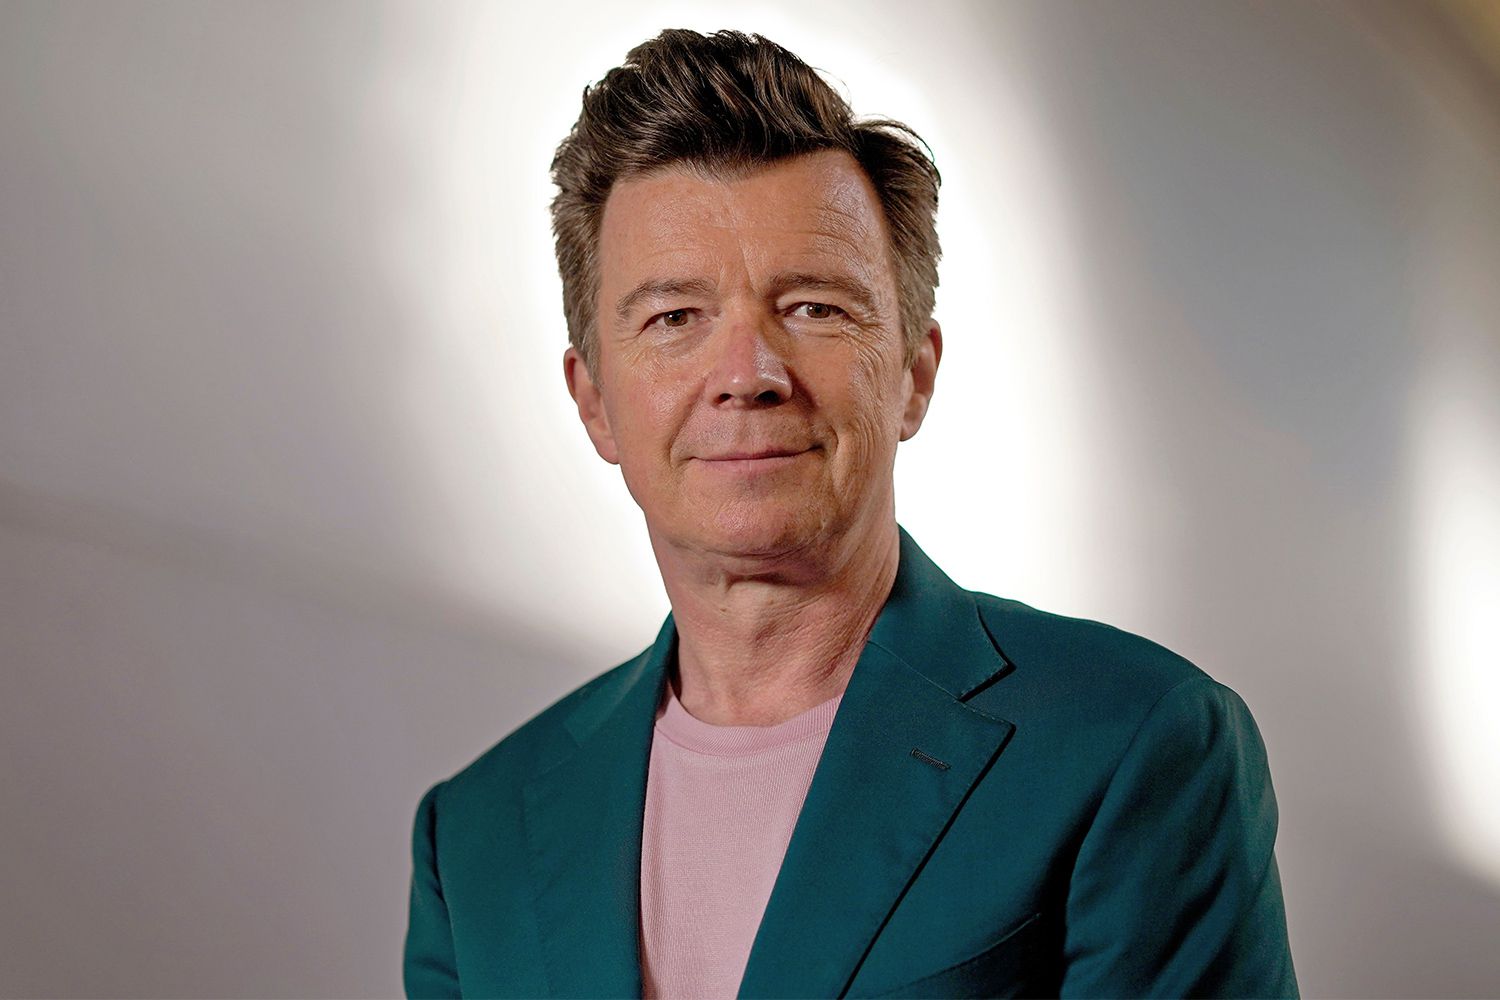 Rick Astley Recreation Never Gonna Give You Up 081922 1 909d277568c34a599c27fa7503ce7a4c 